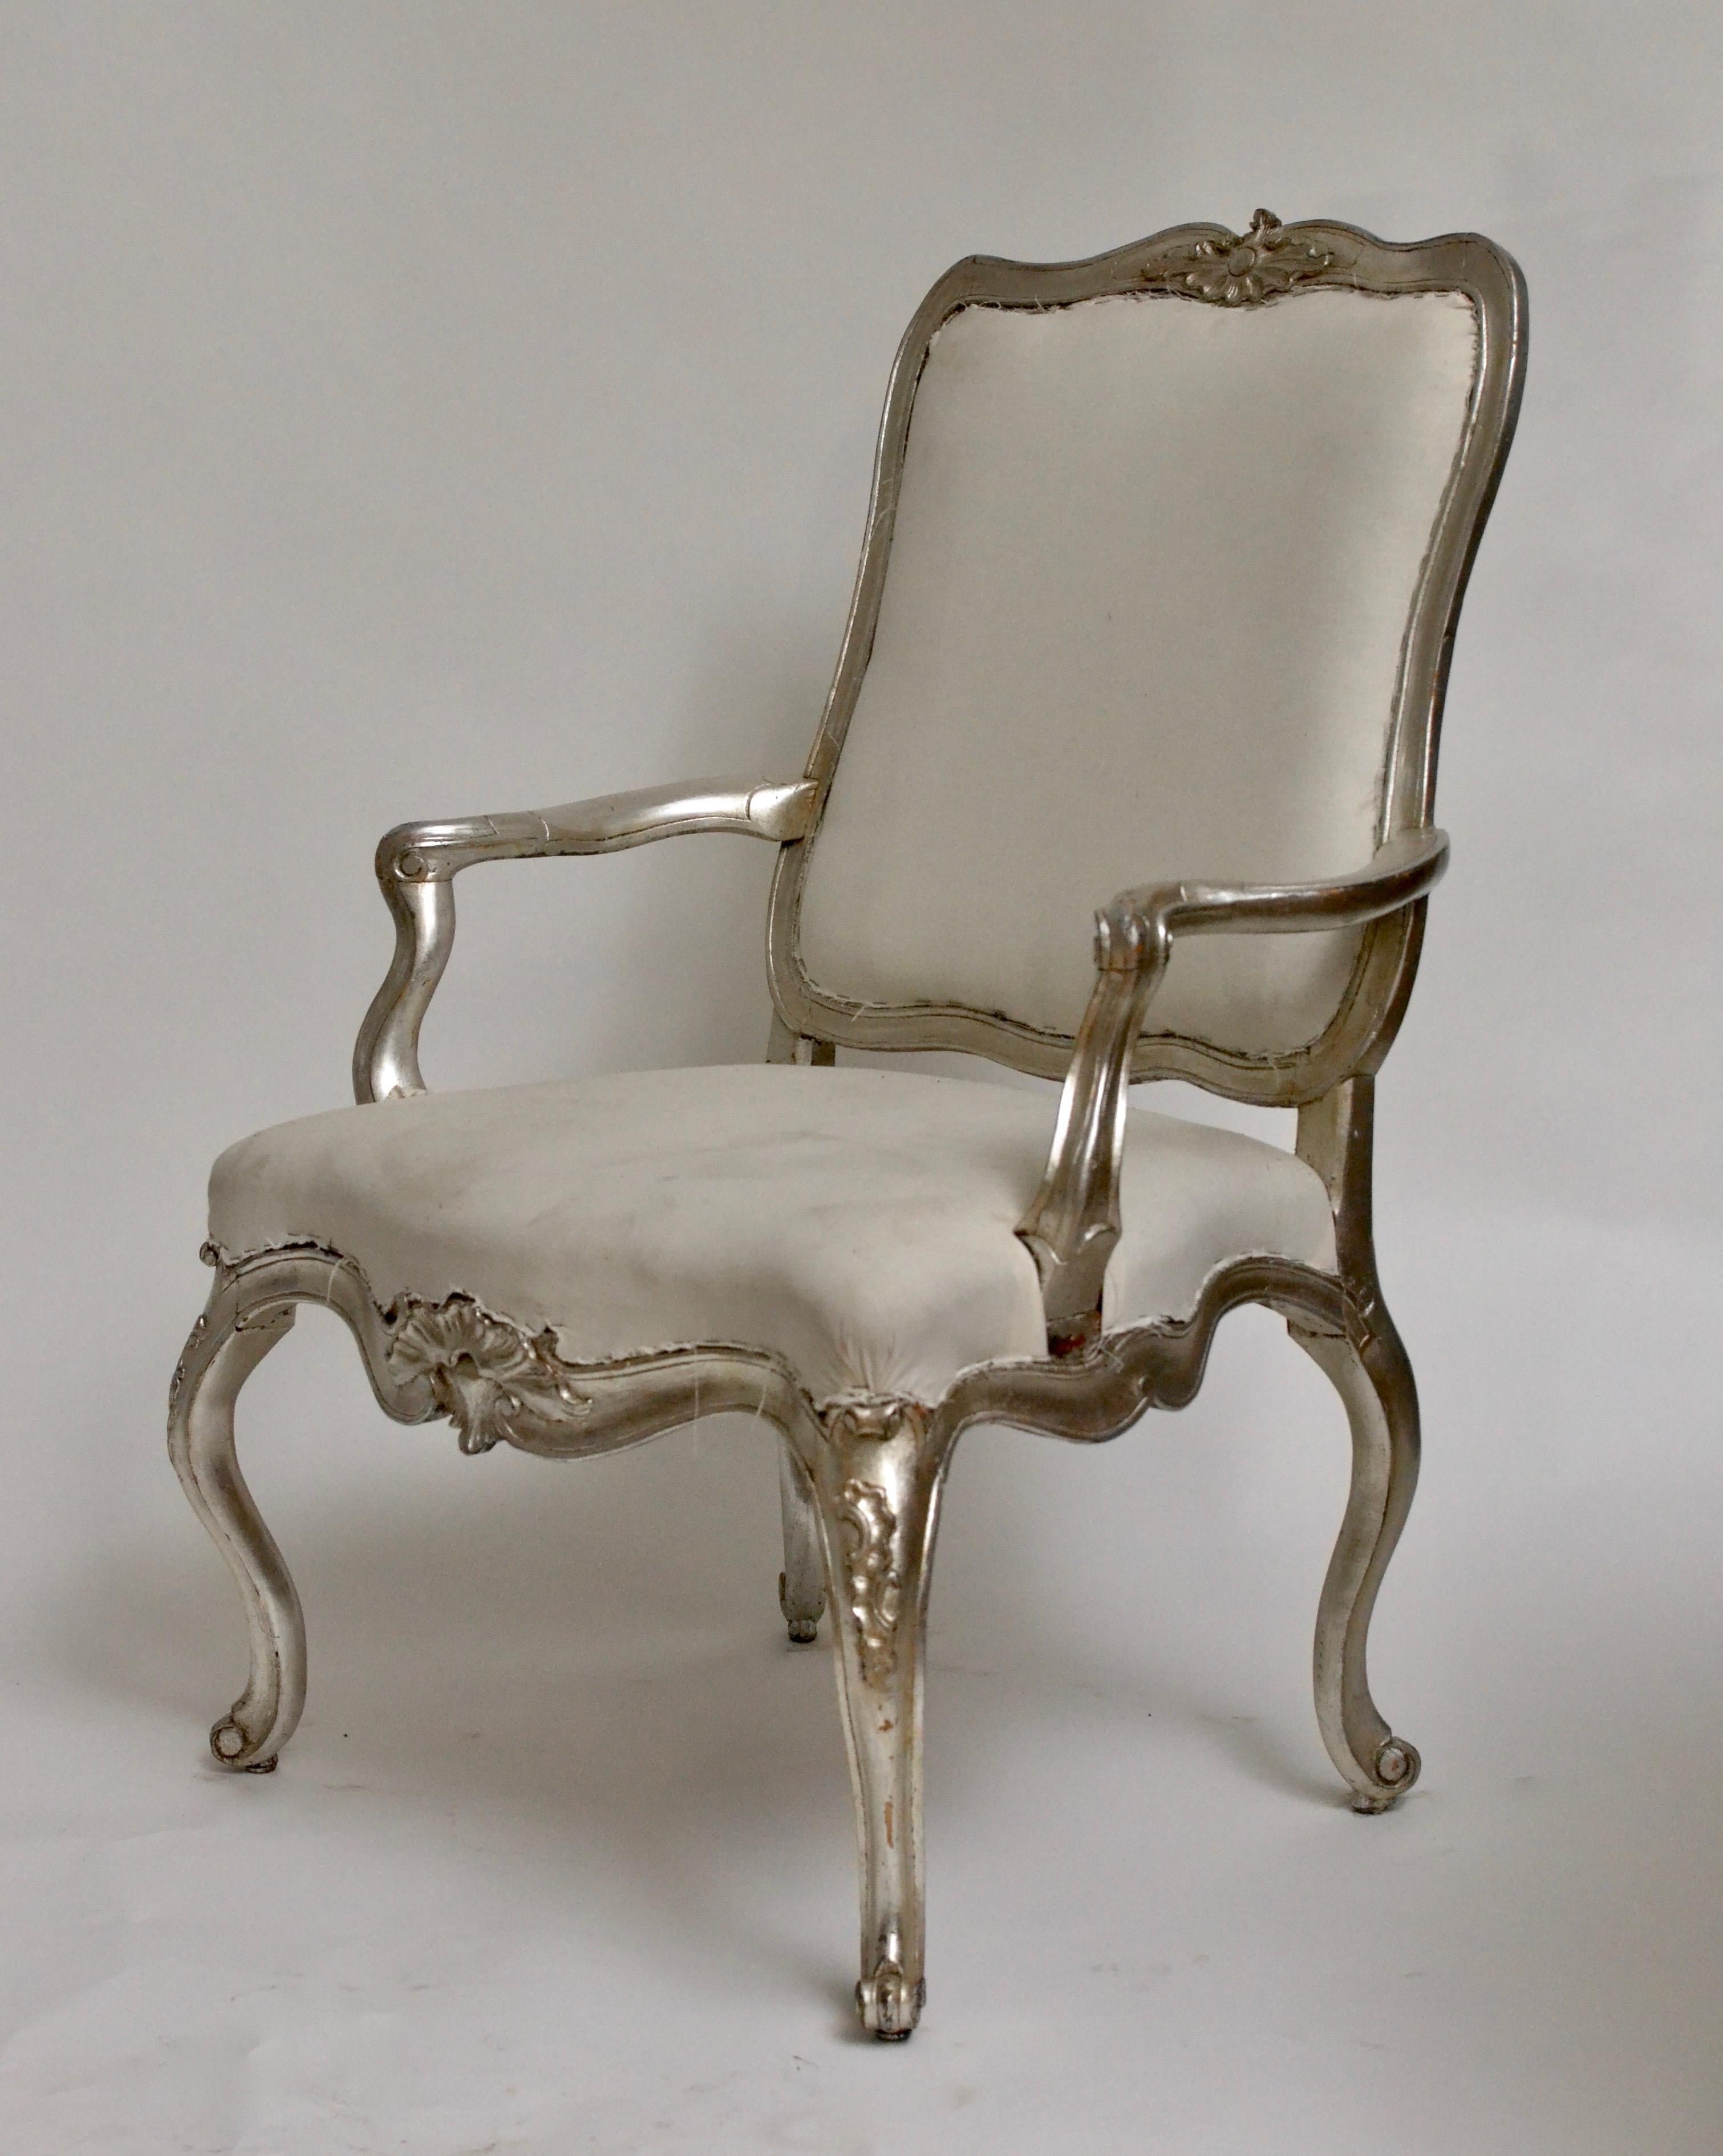 A pair of silvered 18th century Danish Rococo armchairs of grand size. Needs fabric.